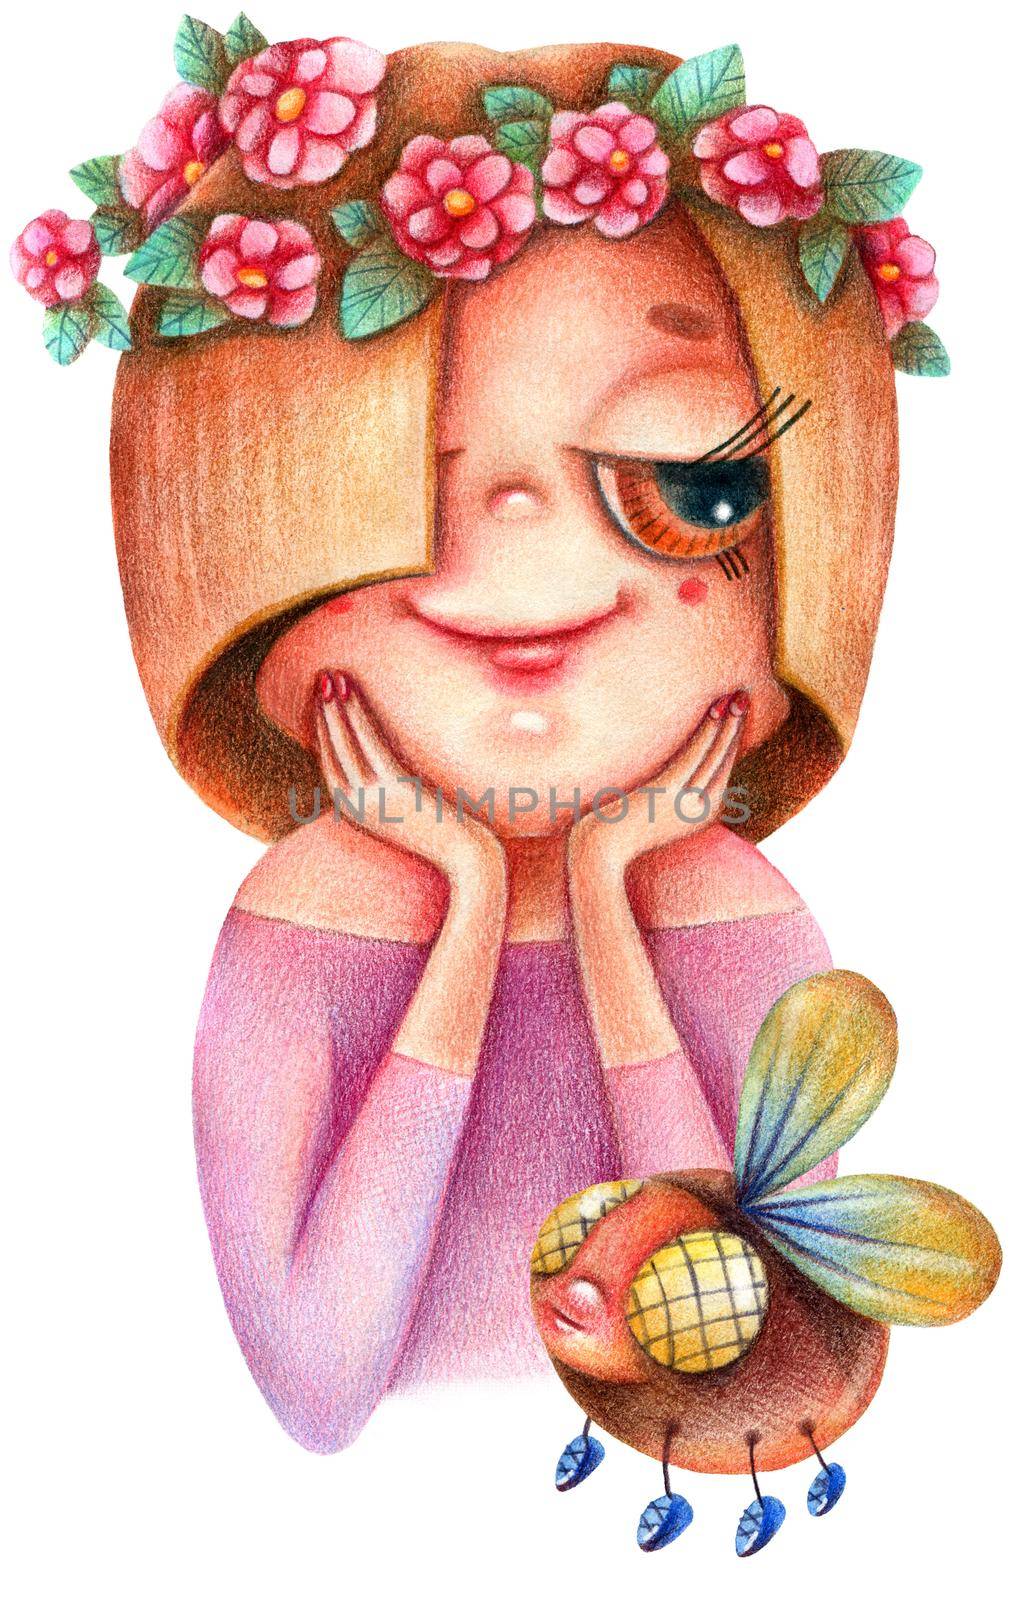 Cute illustration of nice girl with floral wreath and flying insect. Drawings in original style by colored pencils.